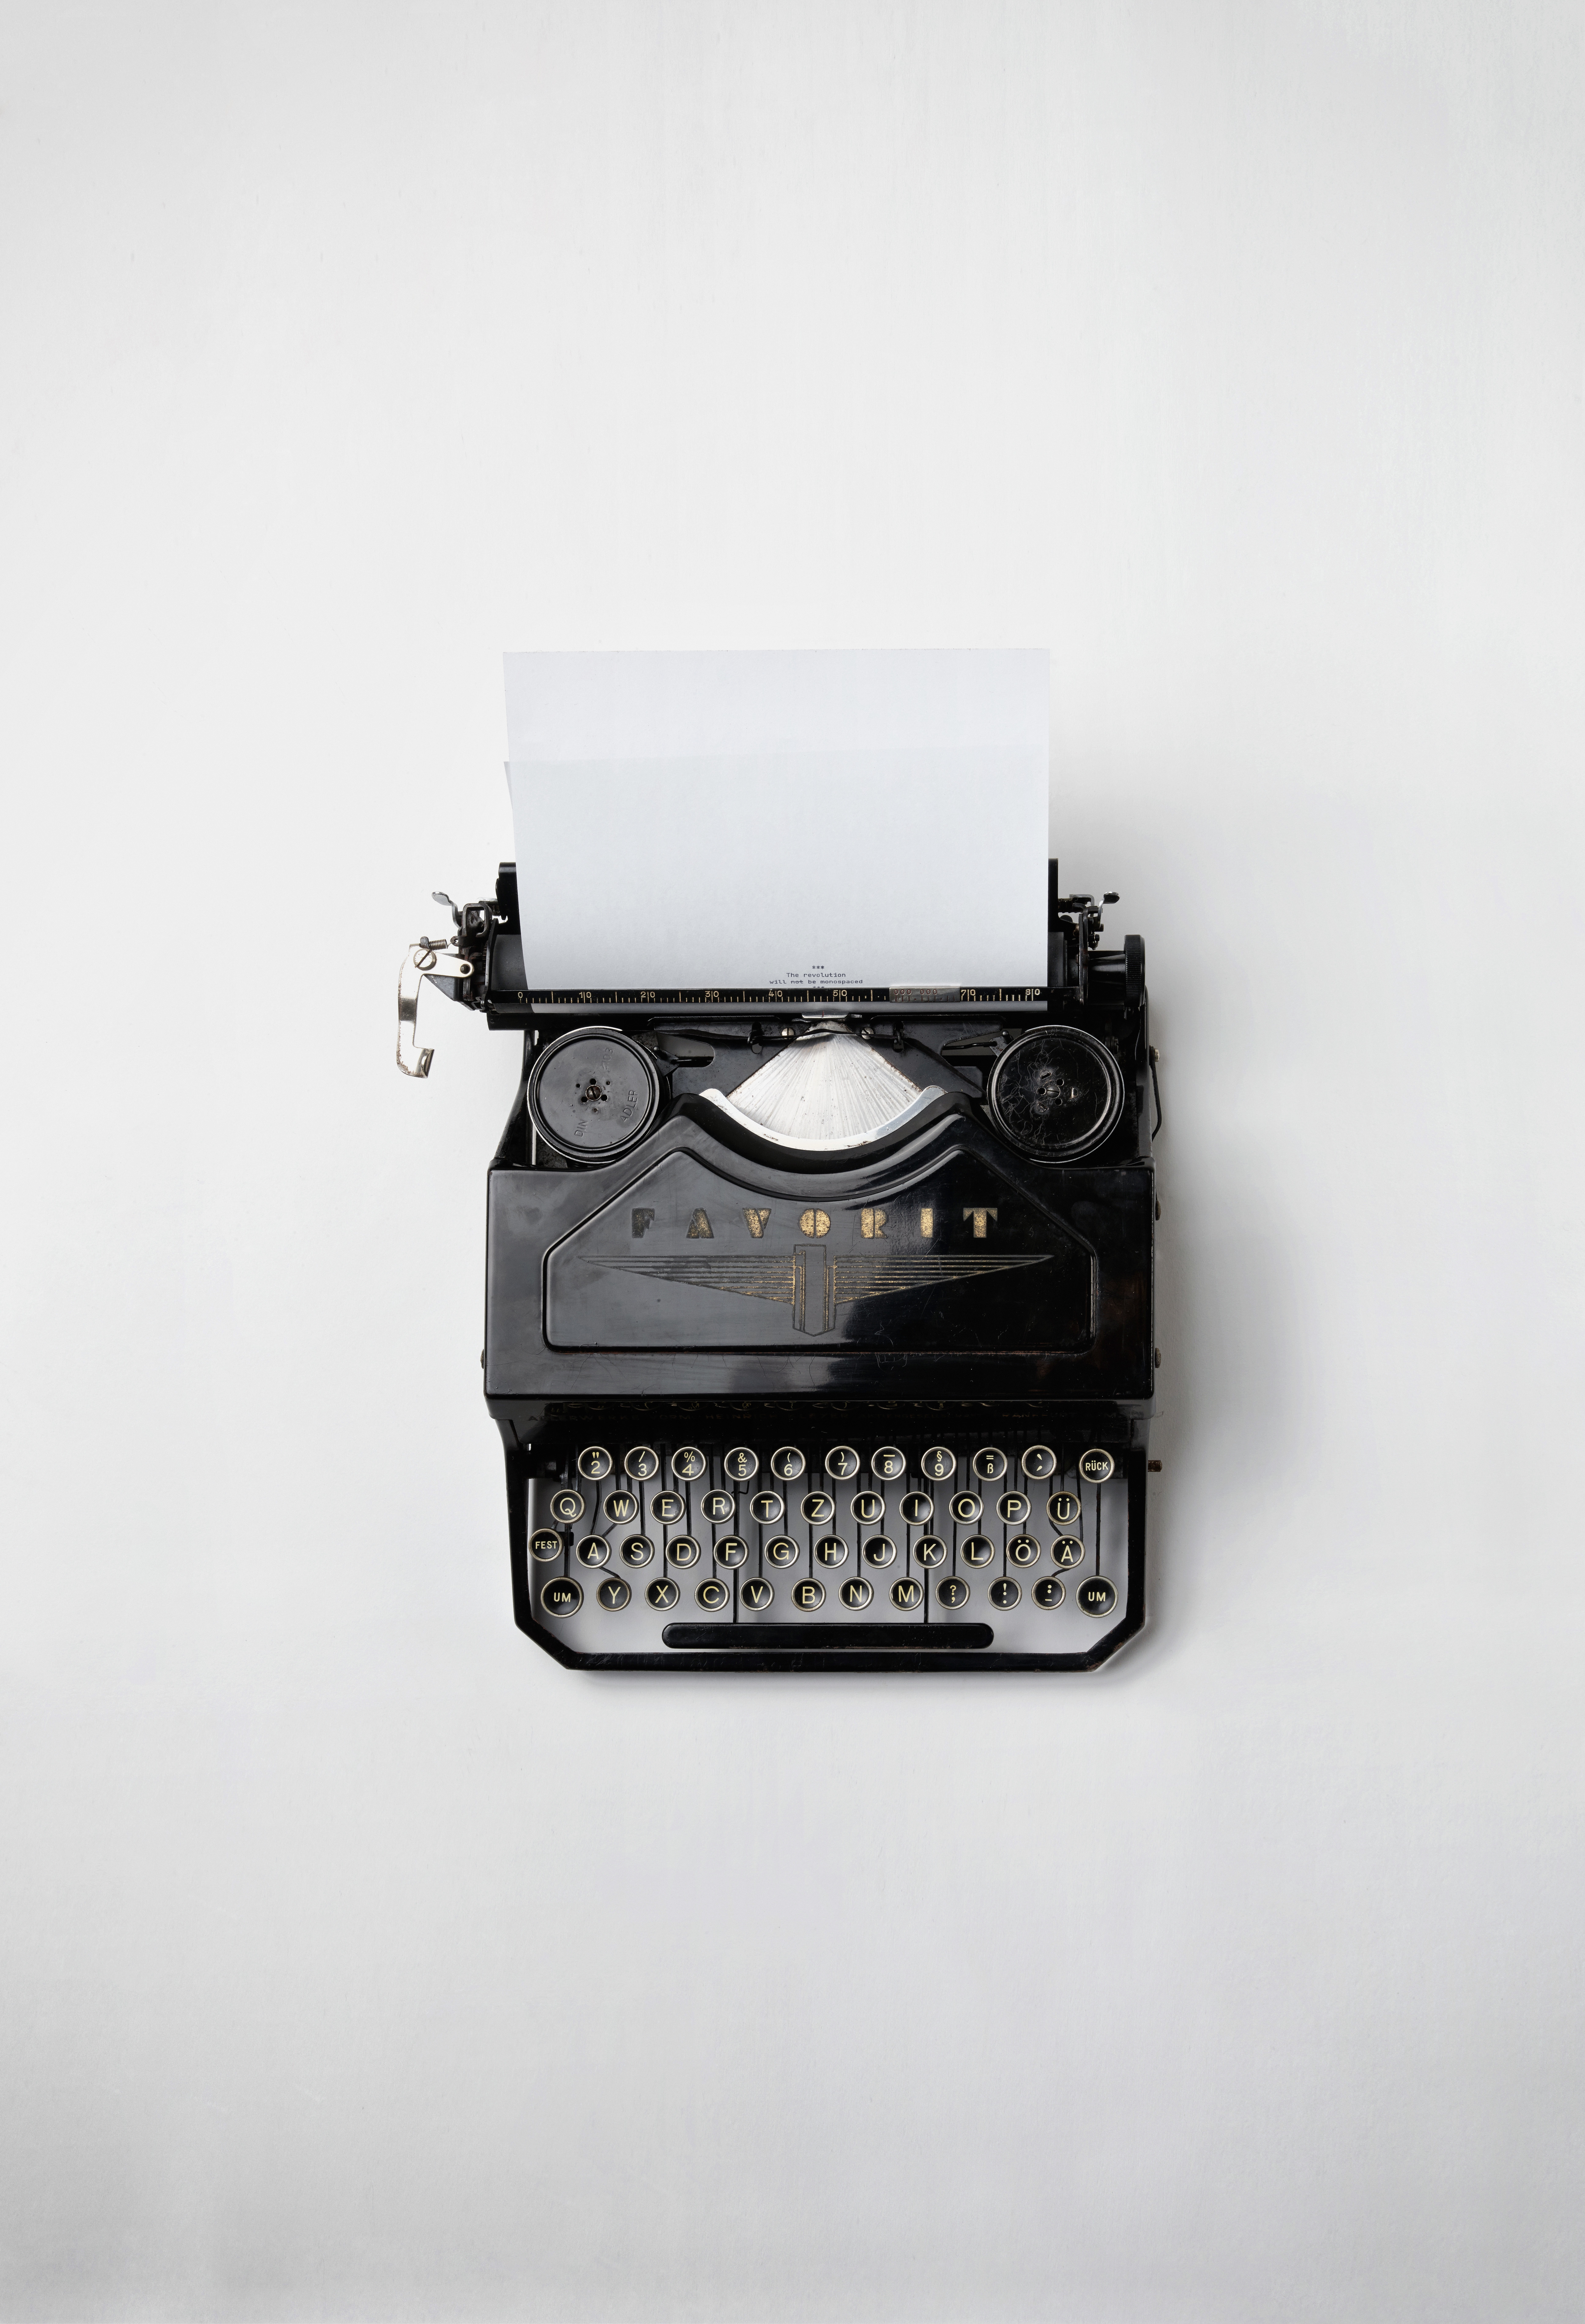 become a better writer- typewriter